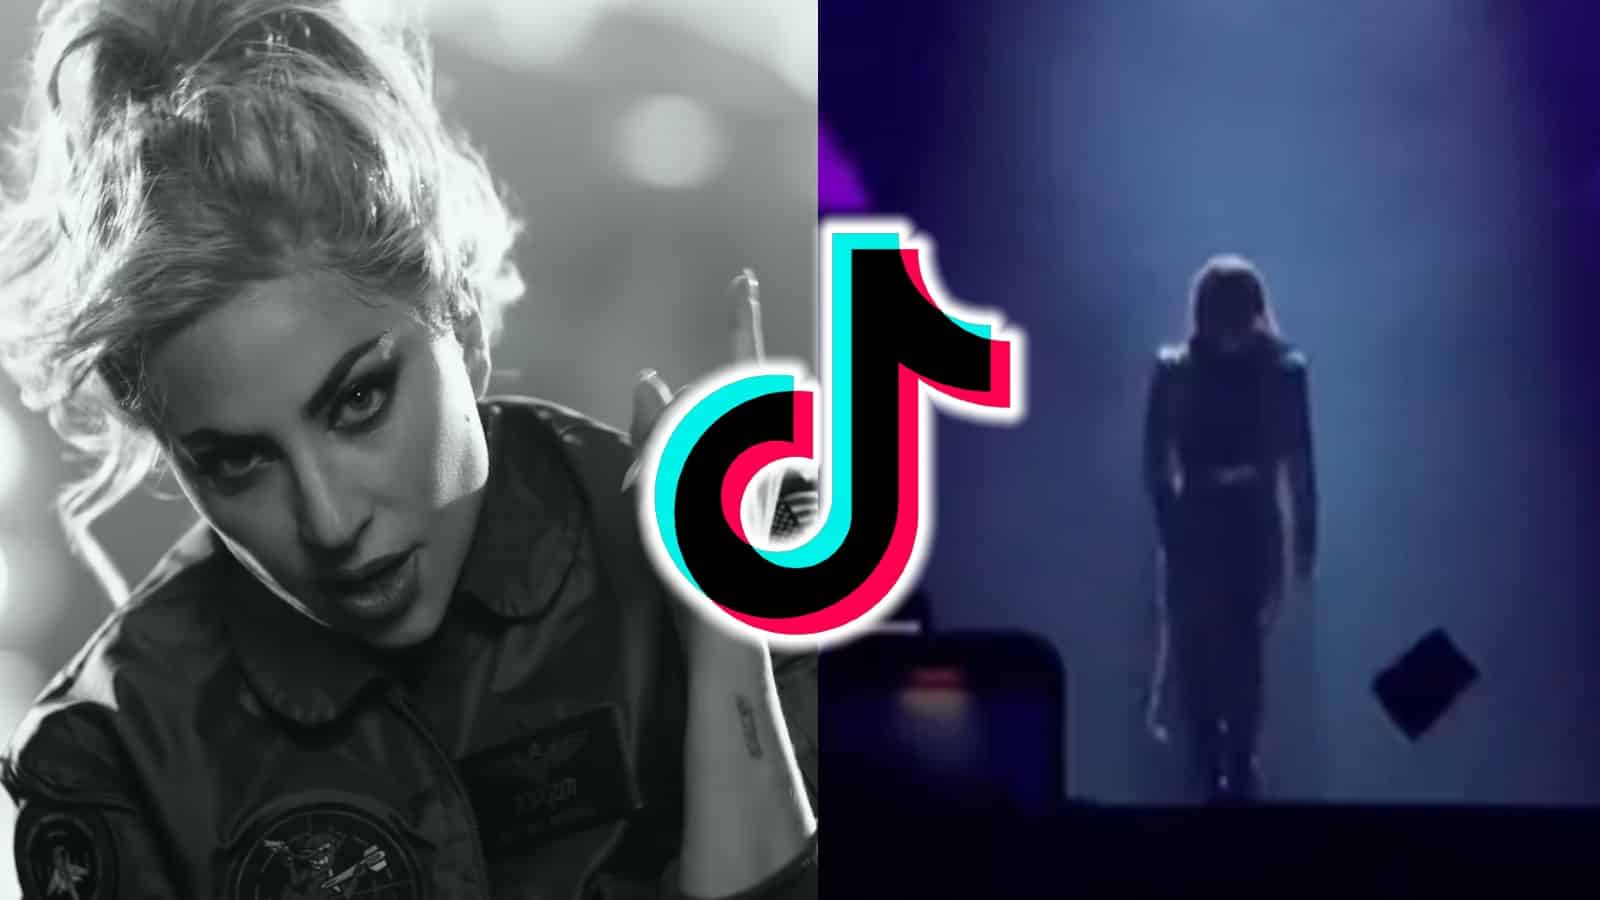 Screenshot from Lady Gaga music video with TikTok showing 'invisible shield' supposedly protecting her during her concert